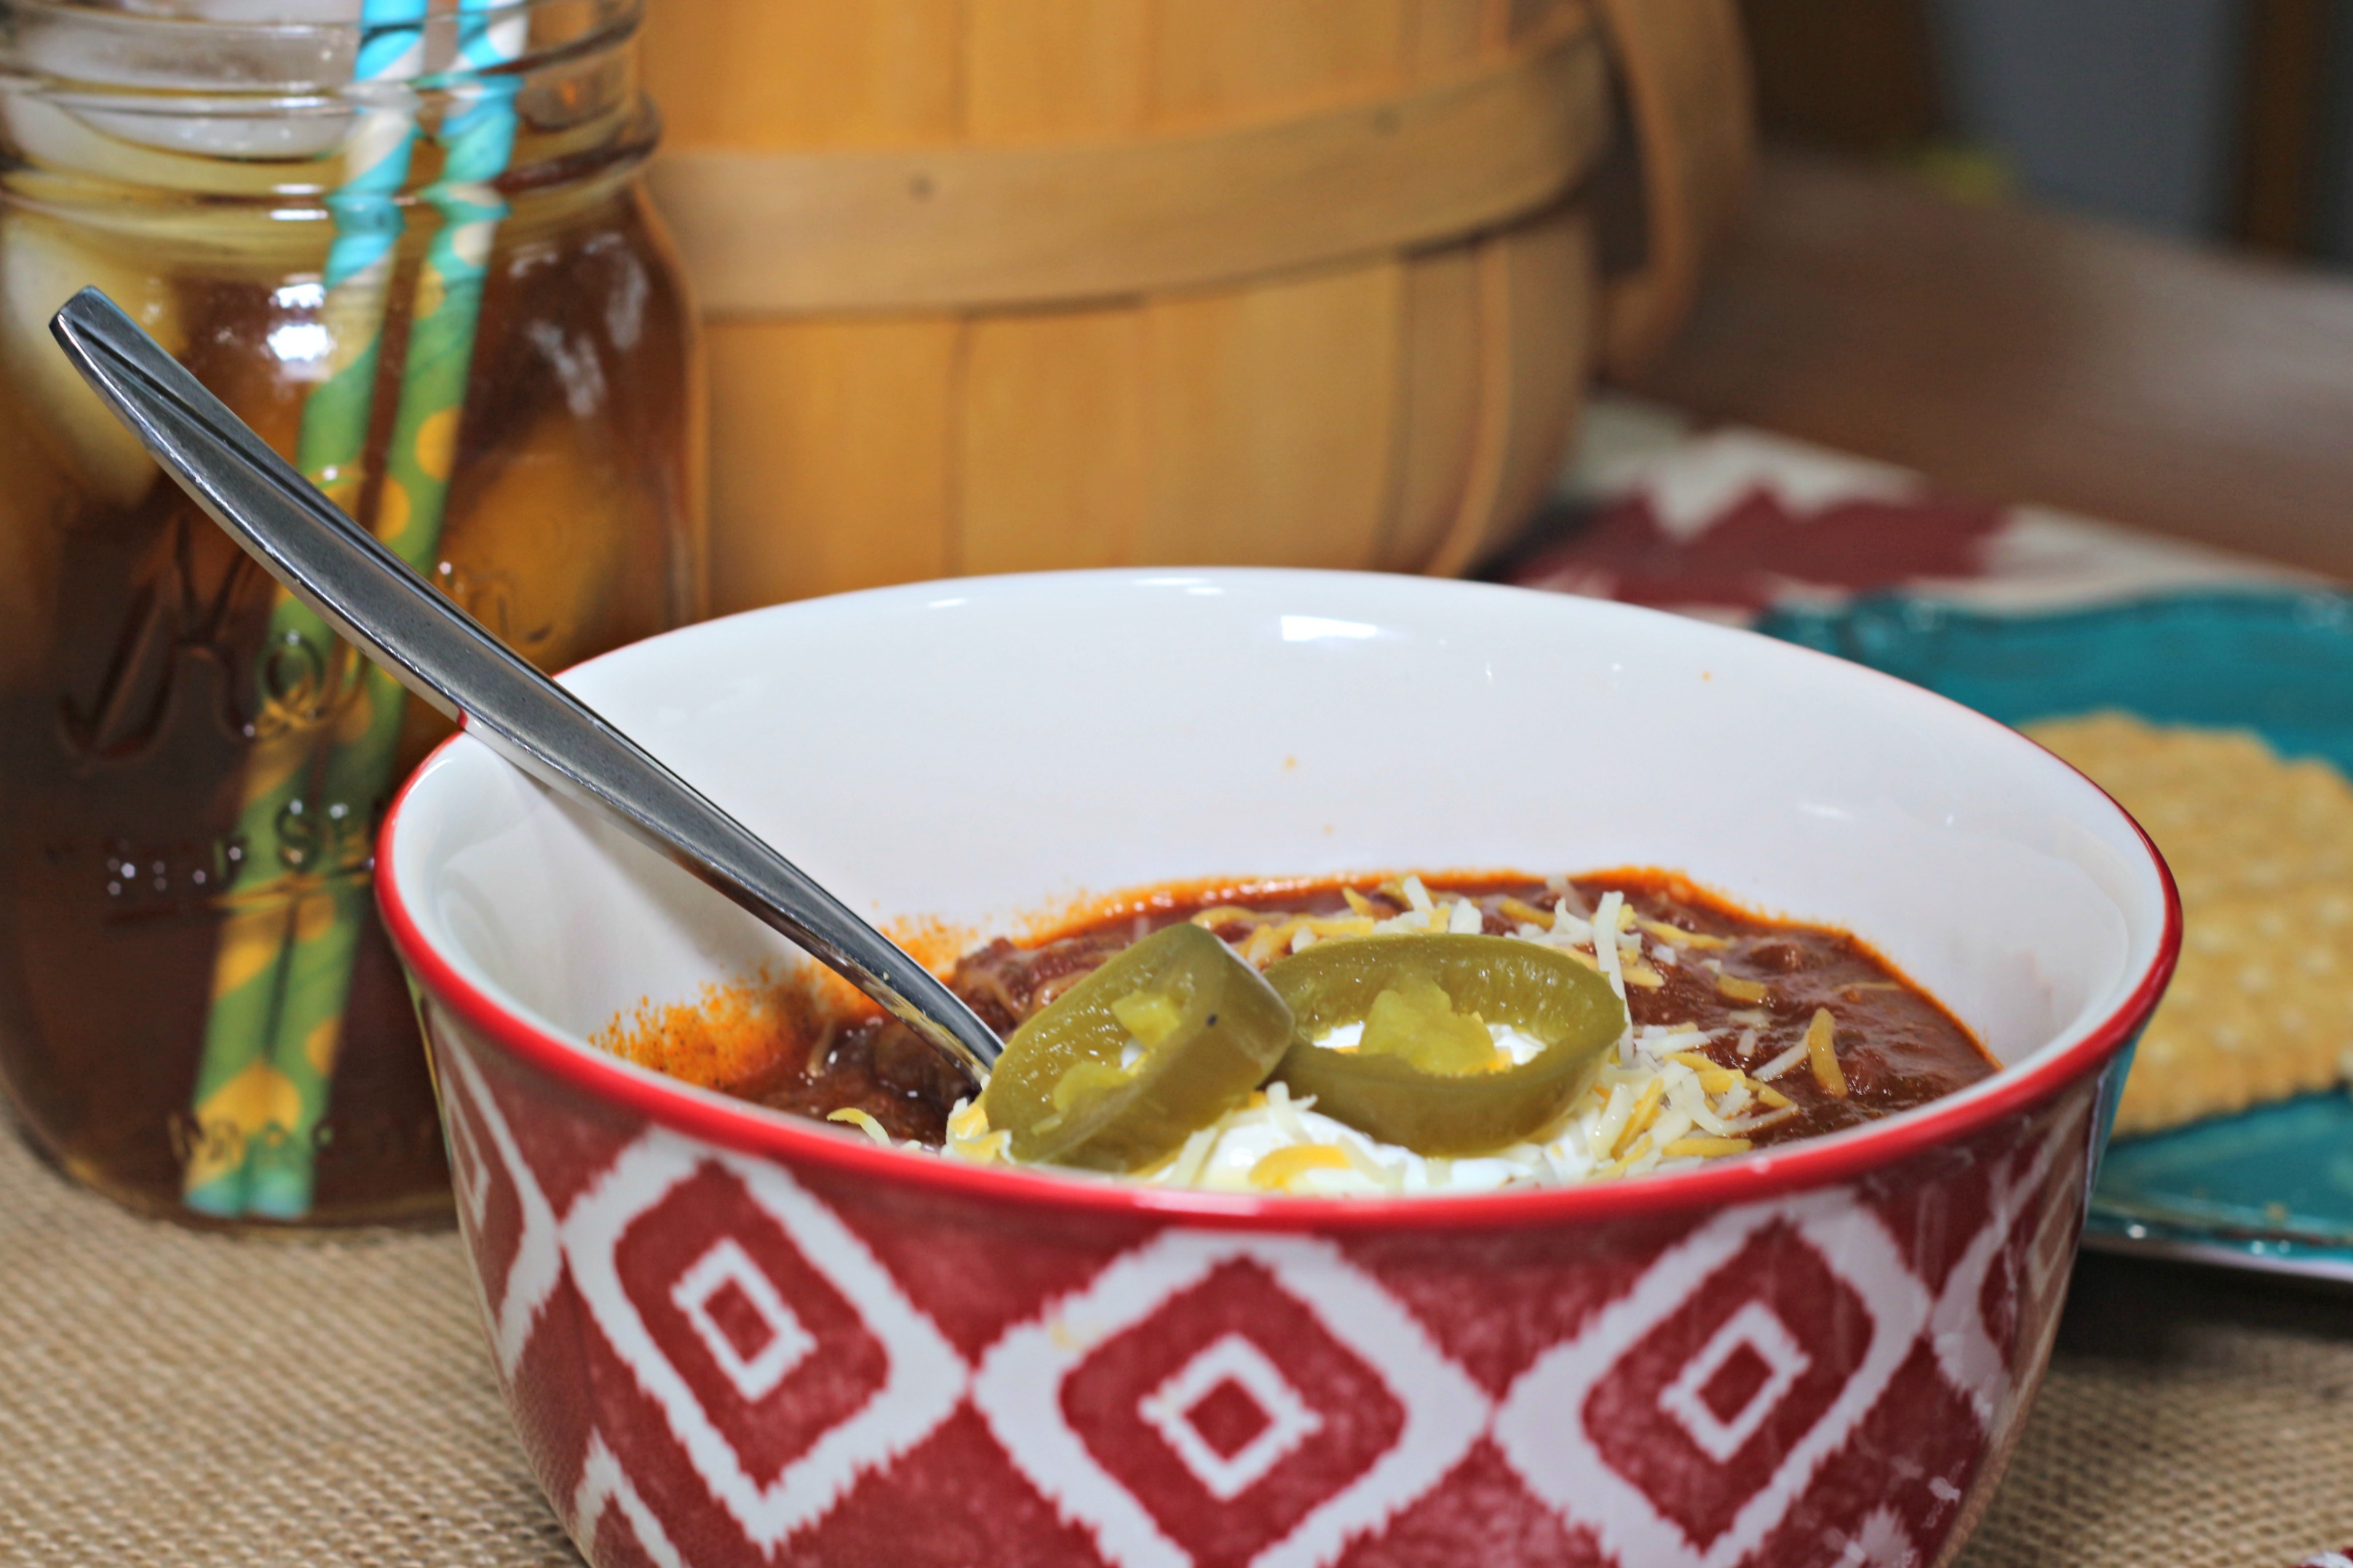 How to make kick-ass crock pot chili|Ripped jeans and Bifocals